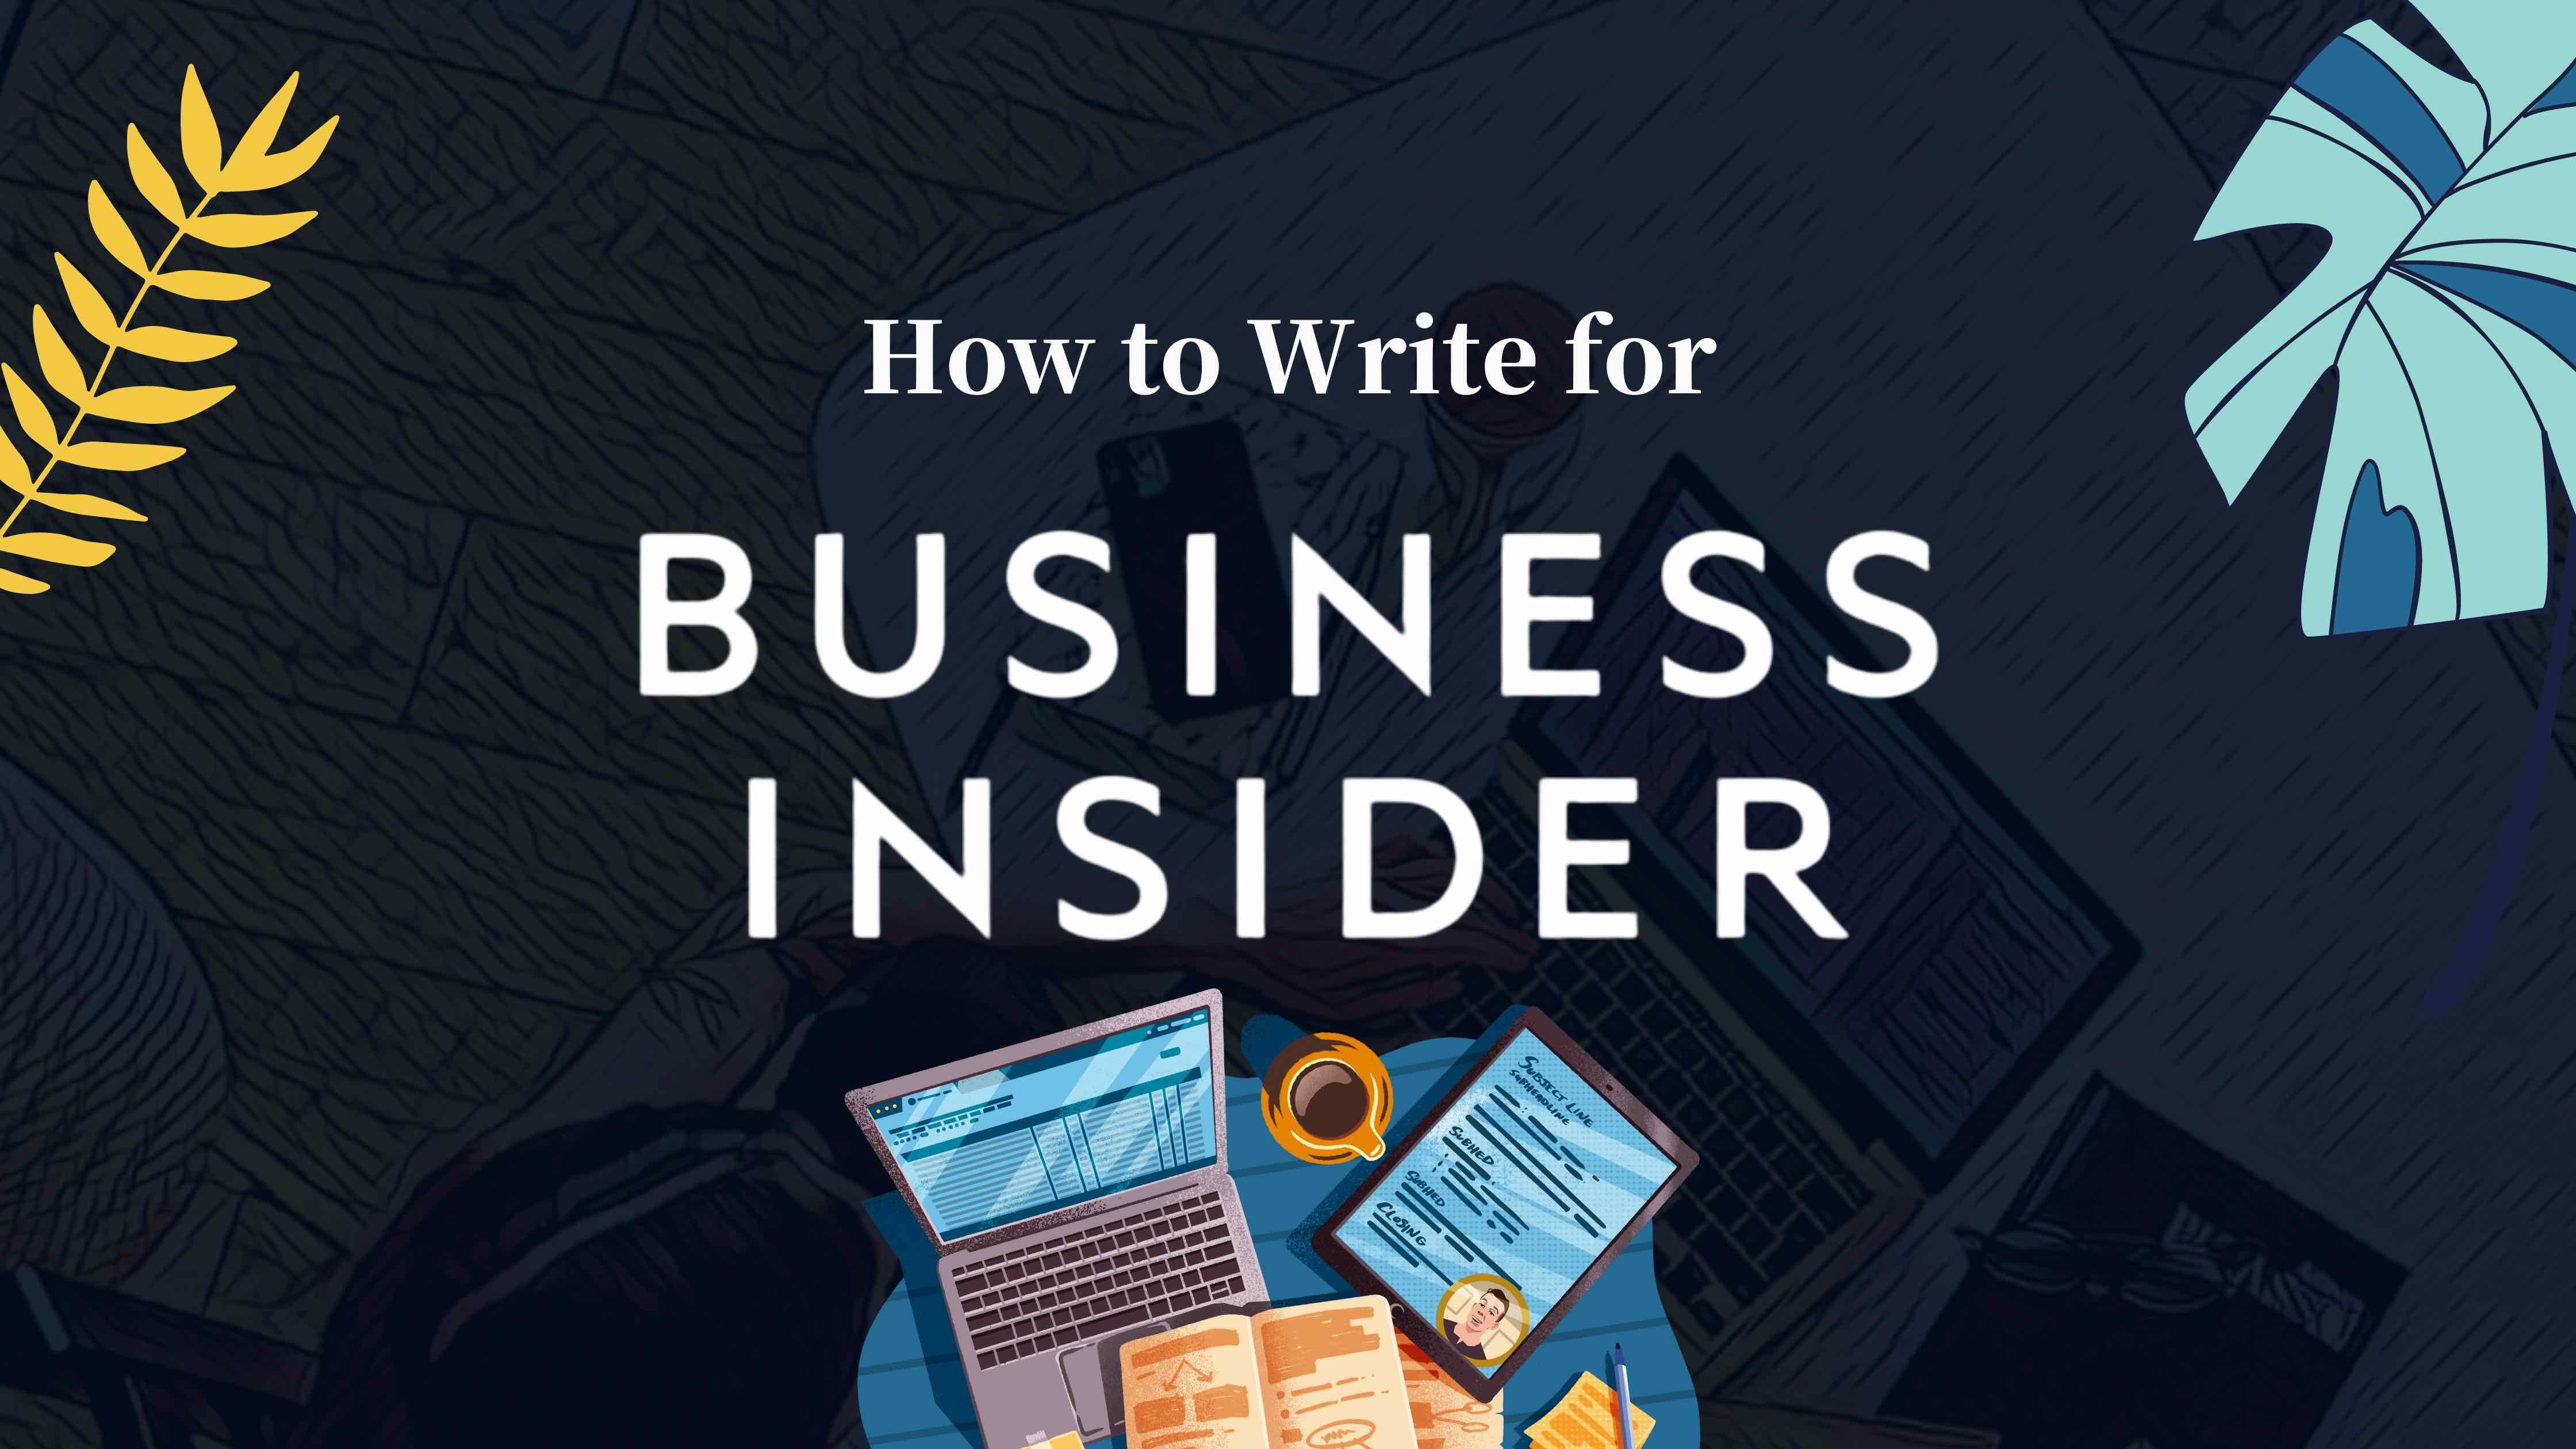 How to Write for Business Insider, Get Exposure and Elevate Your Brand